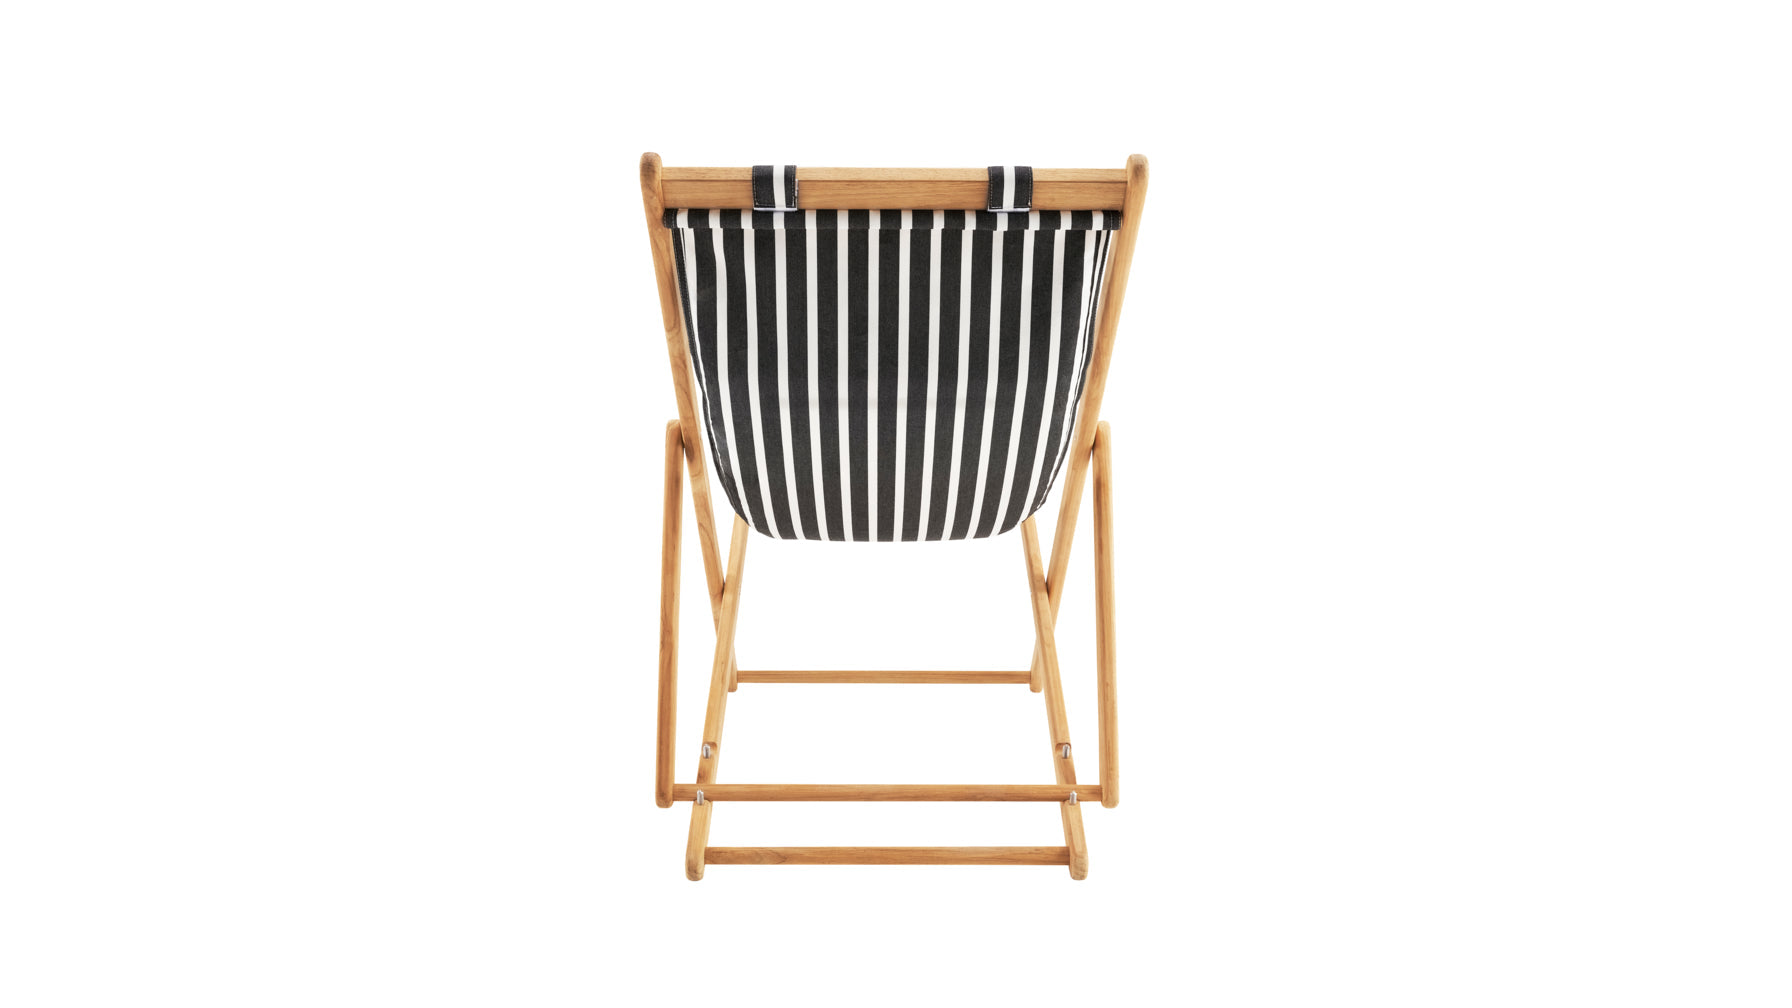 Settle In Outdoor Deck Chair, Black Sand - Image 6